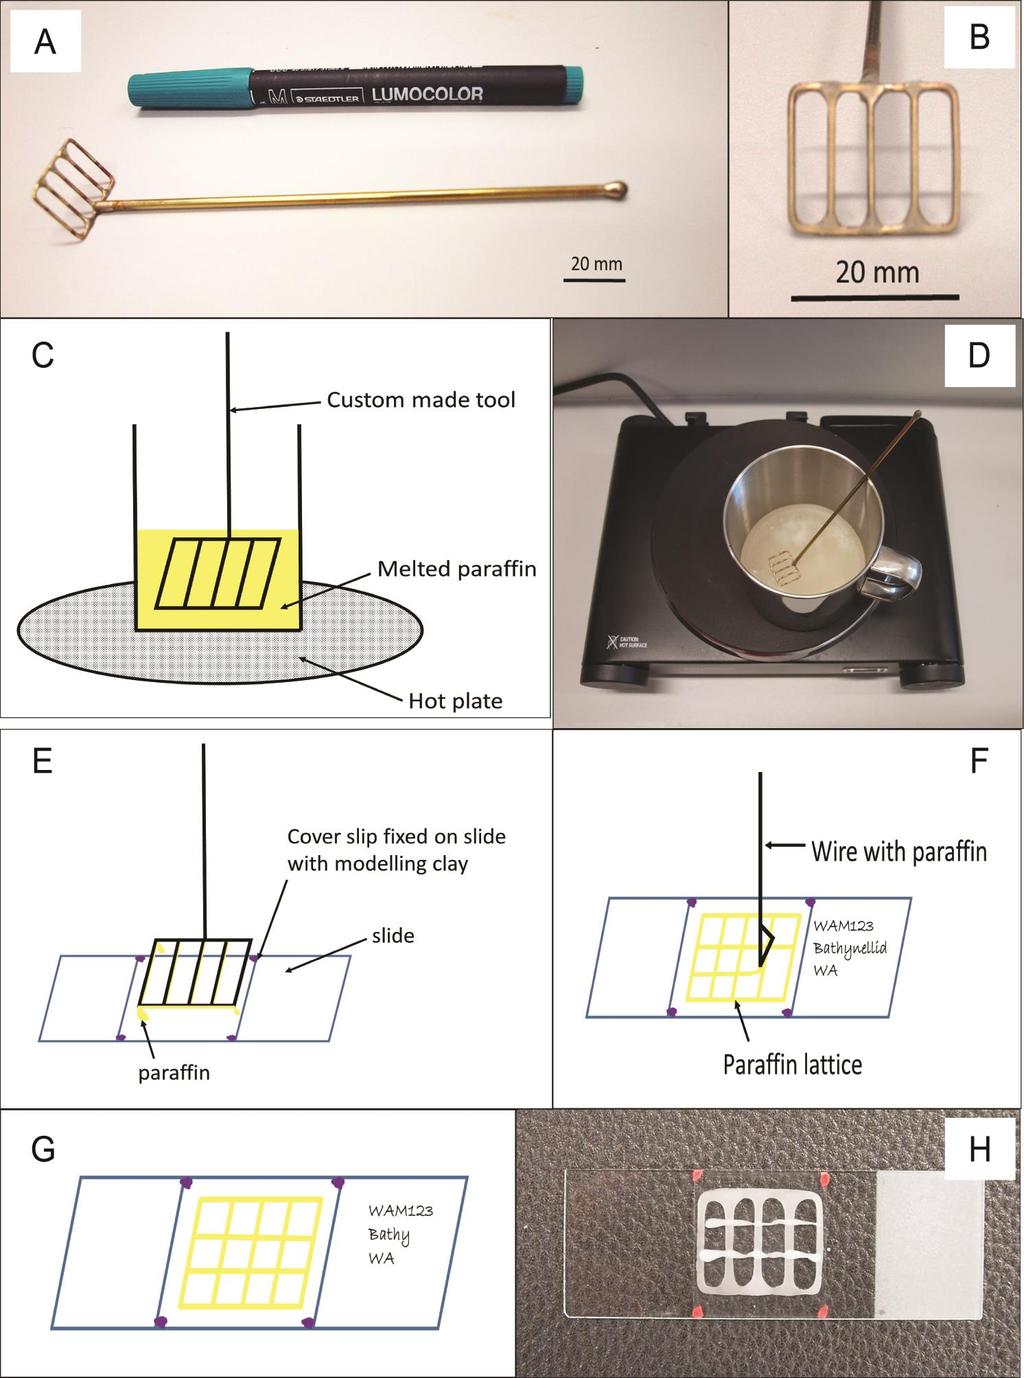 Figure 2. Permanent preparation of Bathynellidae, Camacho s variation implemented. A-B: custom made tool to create the paraffin lattice on cover slip.